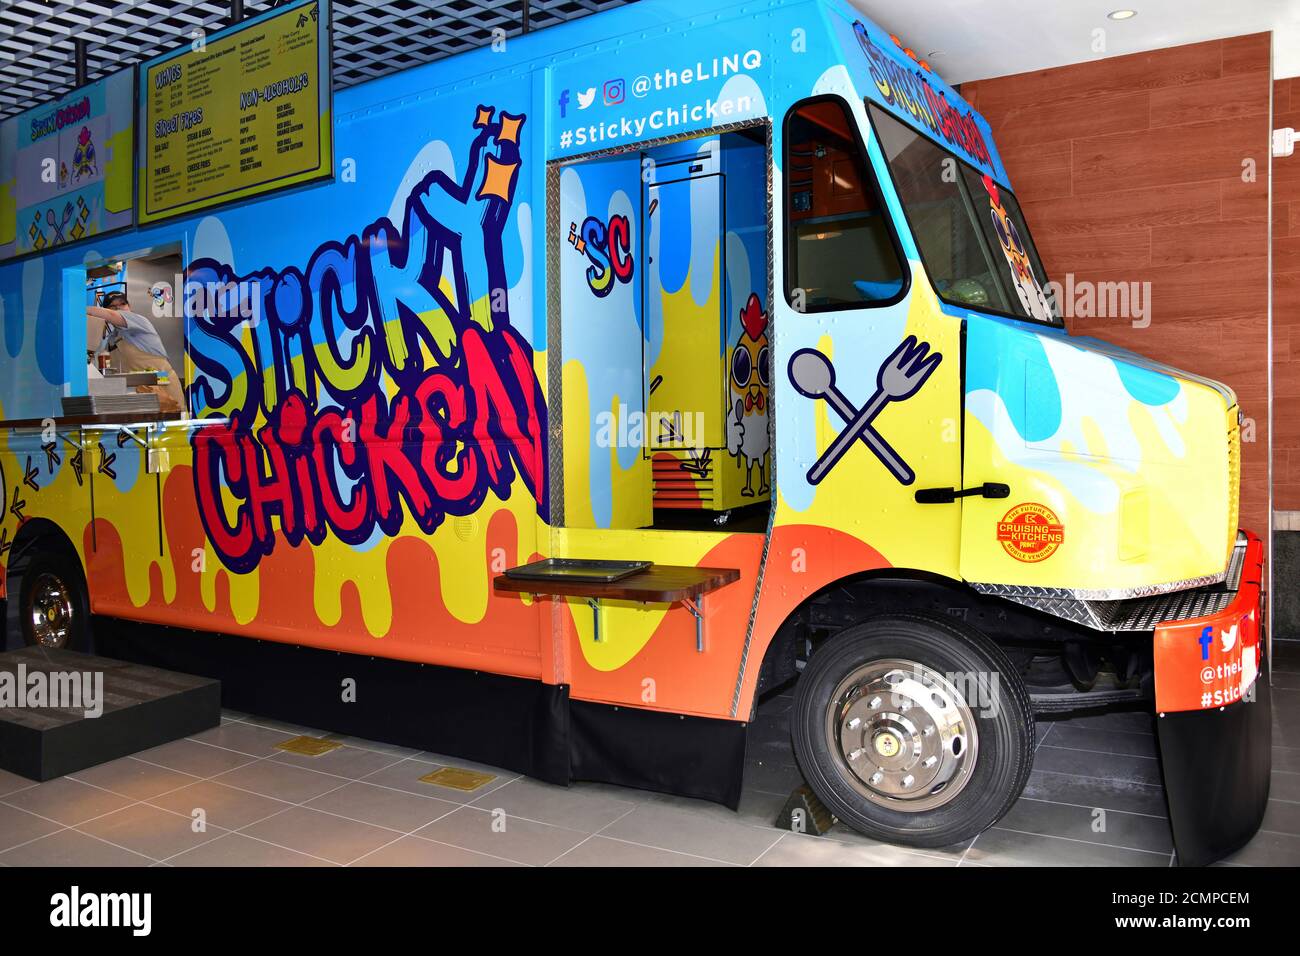 Las Vegas Nevada, USA 09-30-18 Located at The Linq Hotel, Sticky Chicken is the first fast food truck inside a casino. Stock Photo